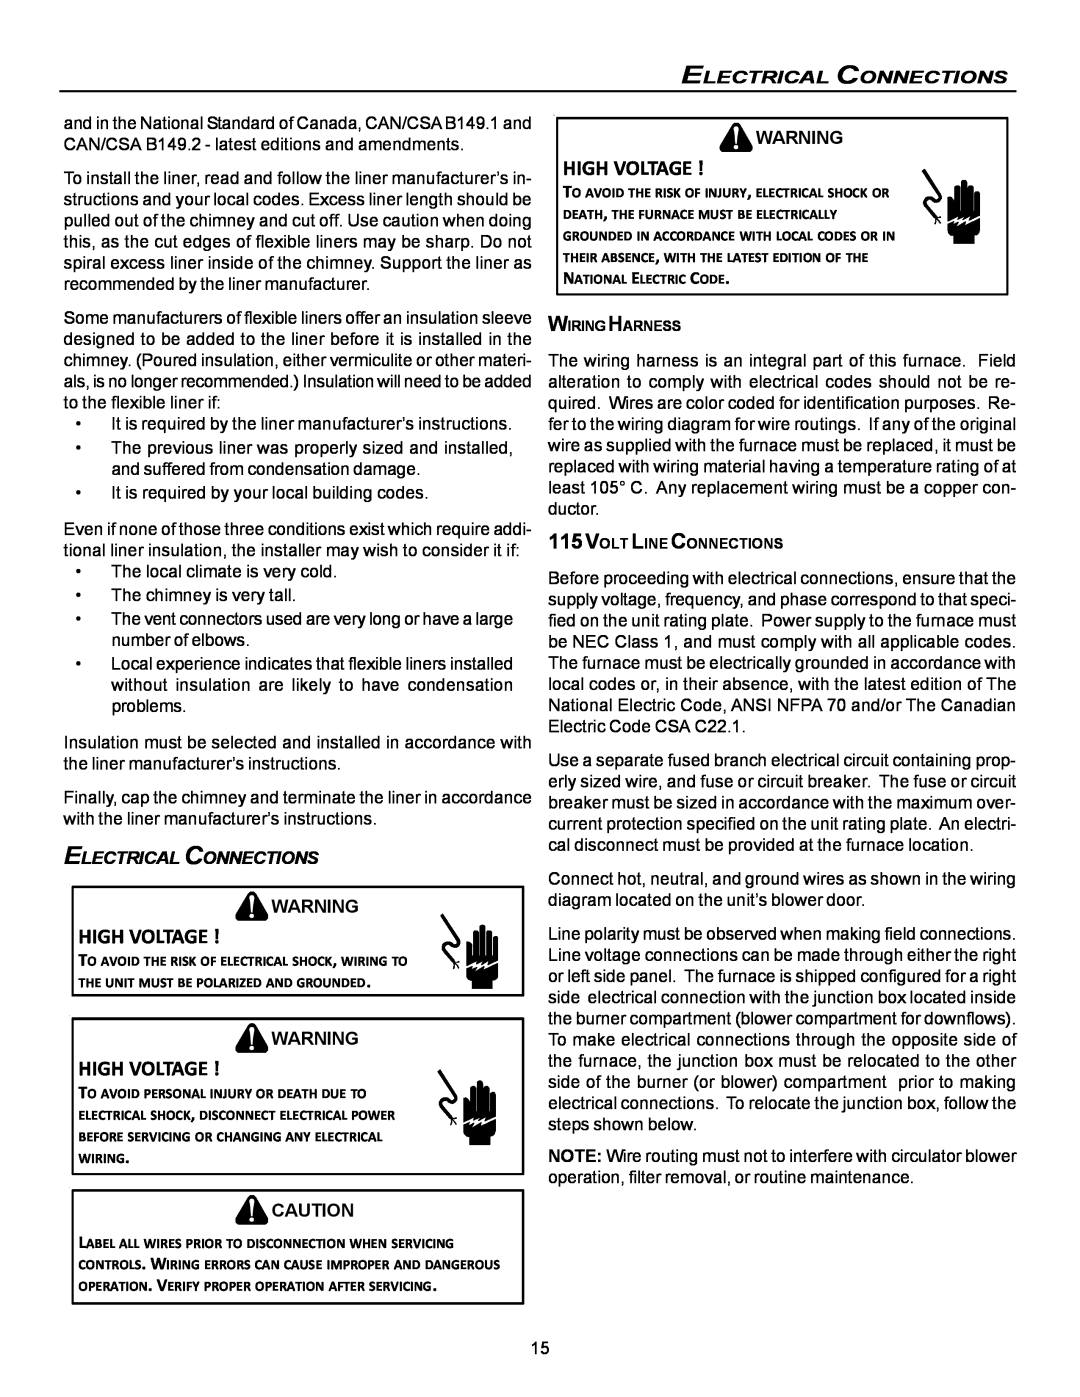 Goodman Mfg VC8 instruction manual High Voltage, Electrical Connections 